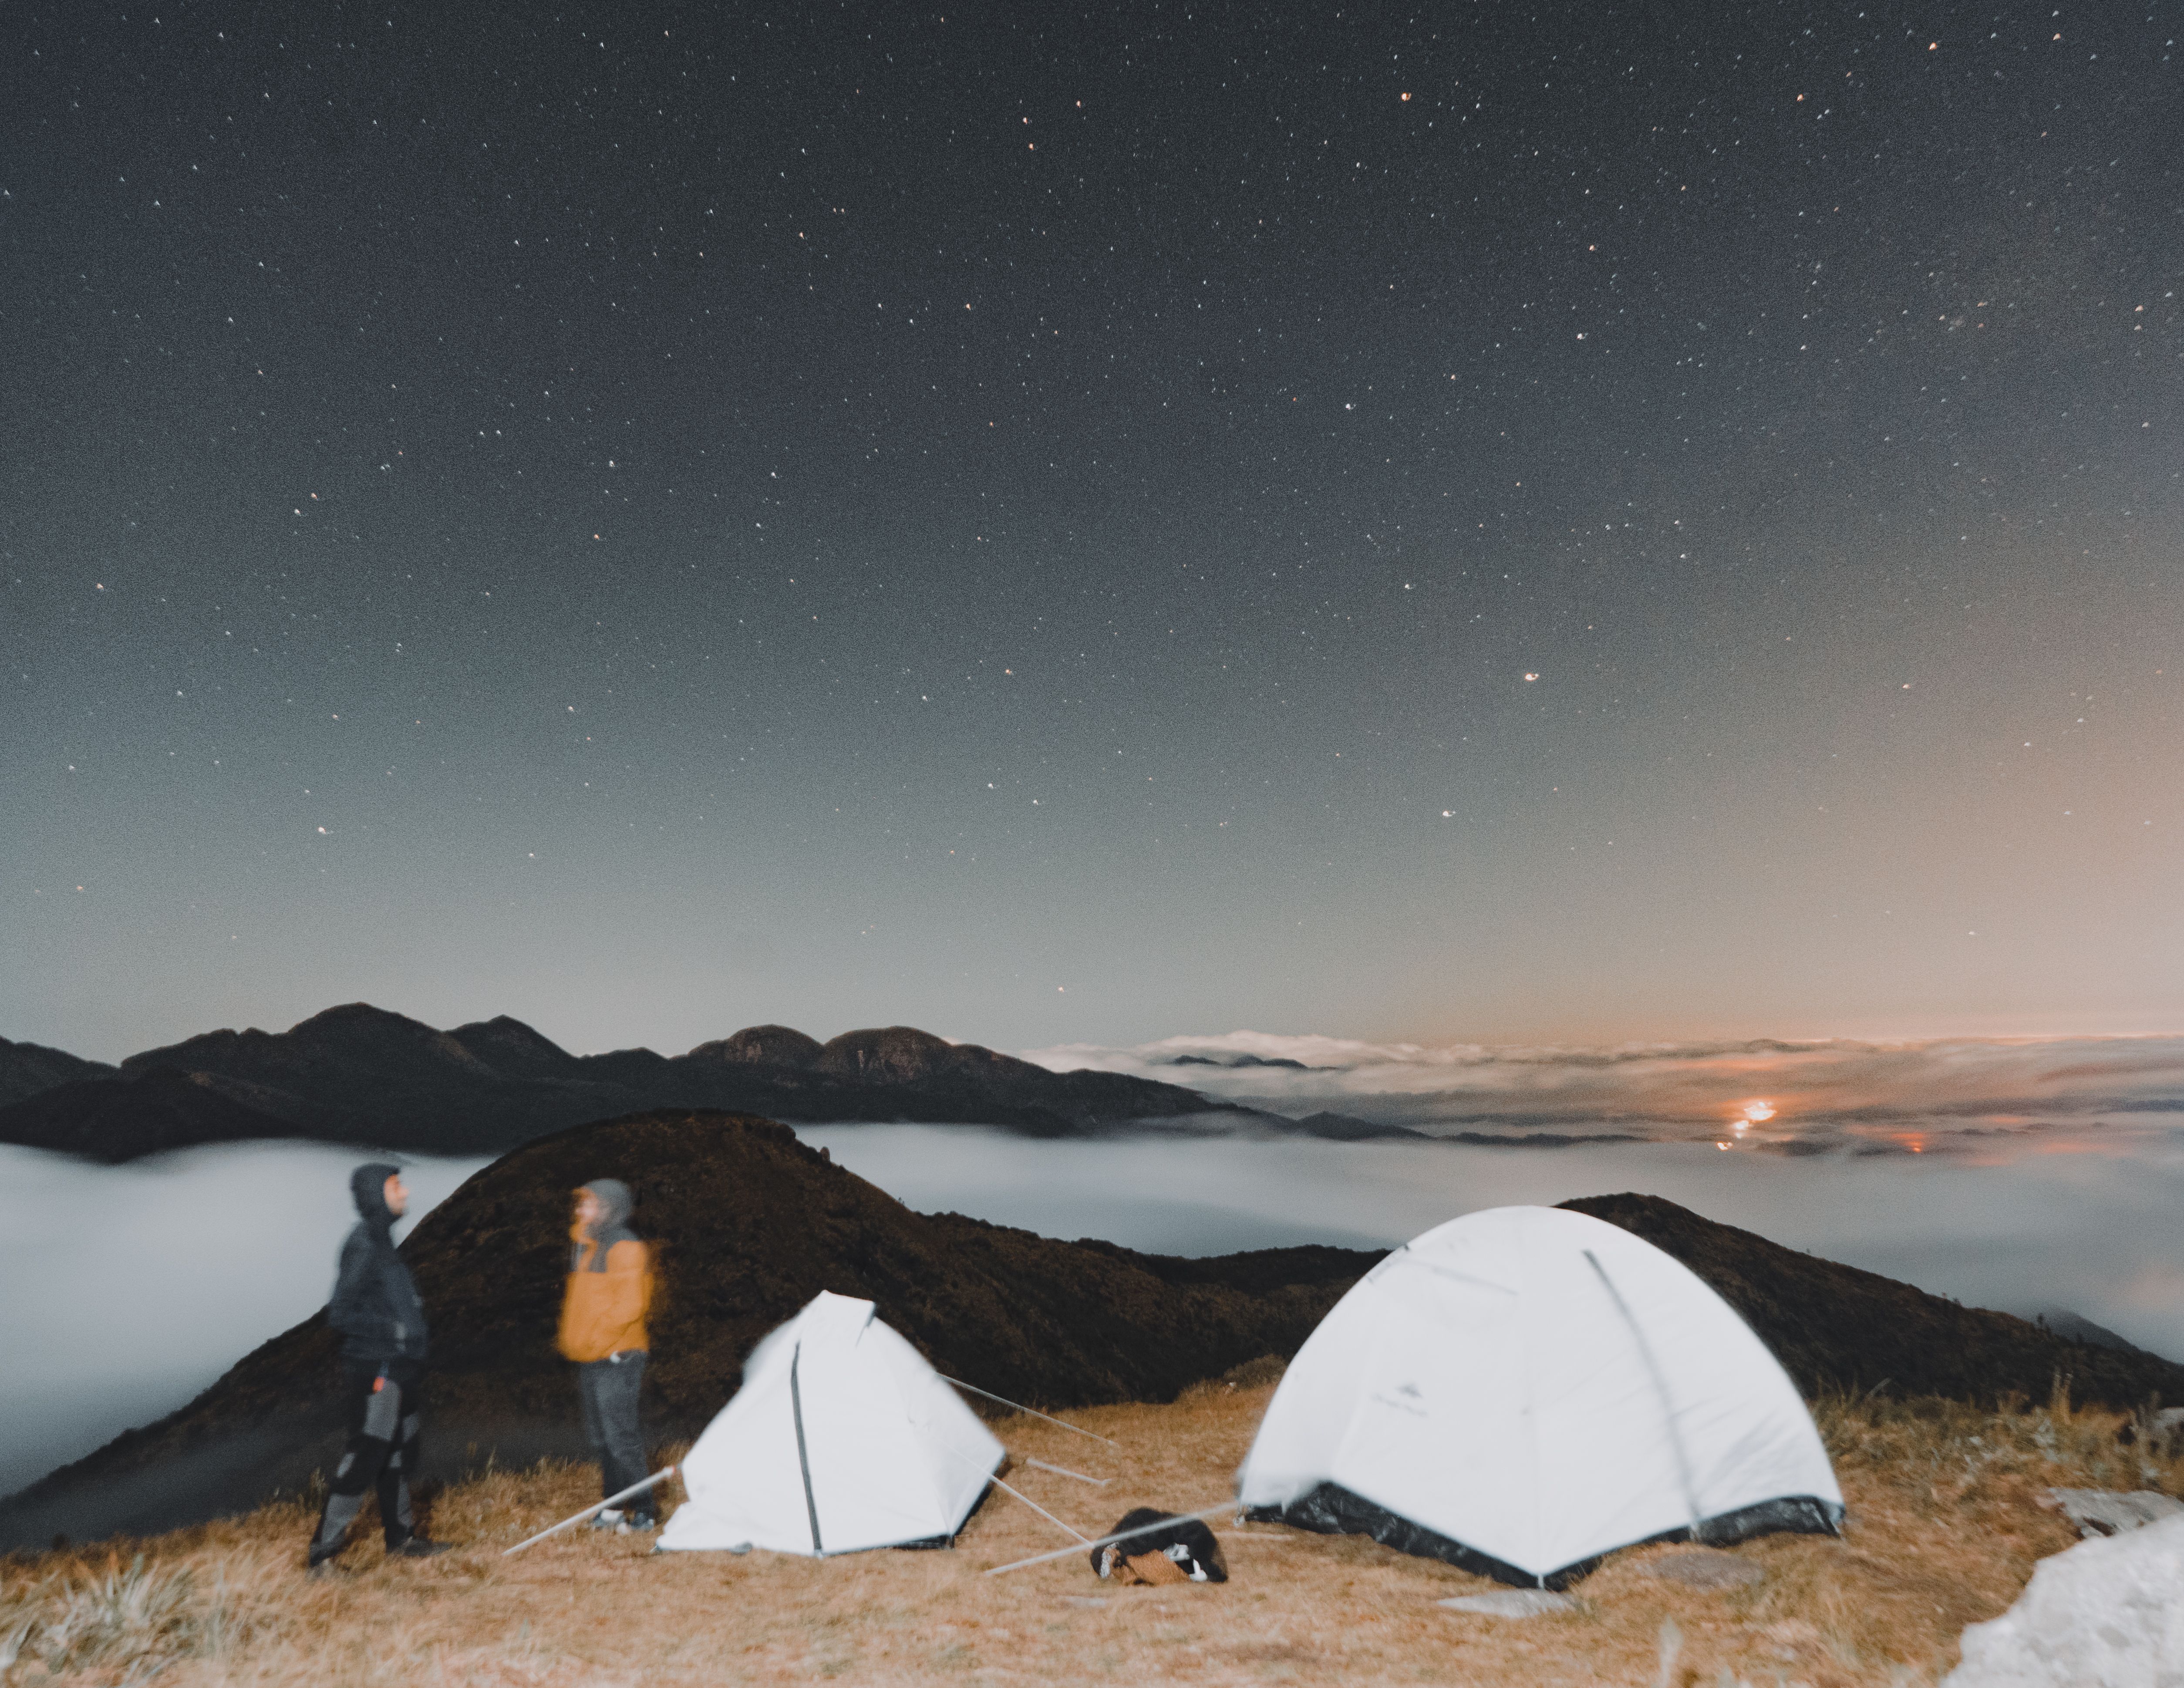 Two people standing outside their tents under a starry sky - Camping